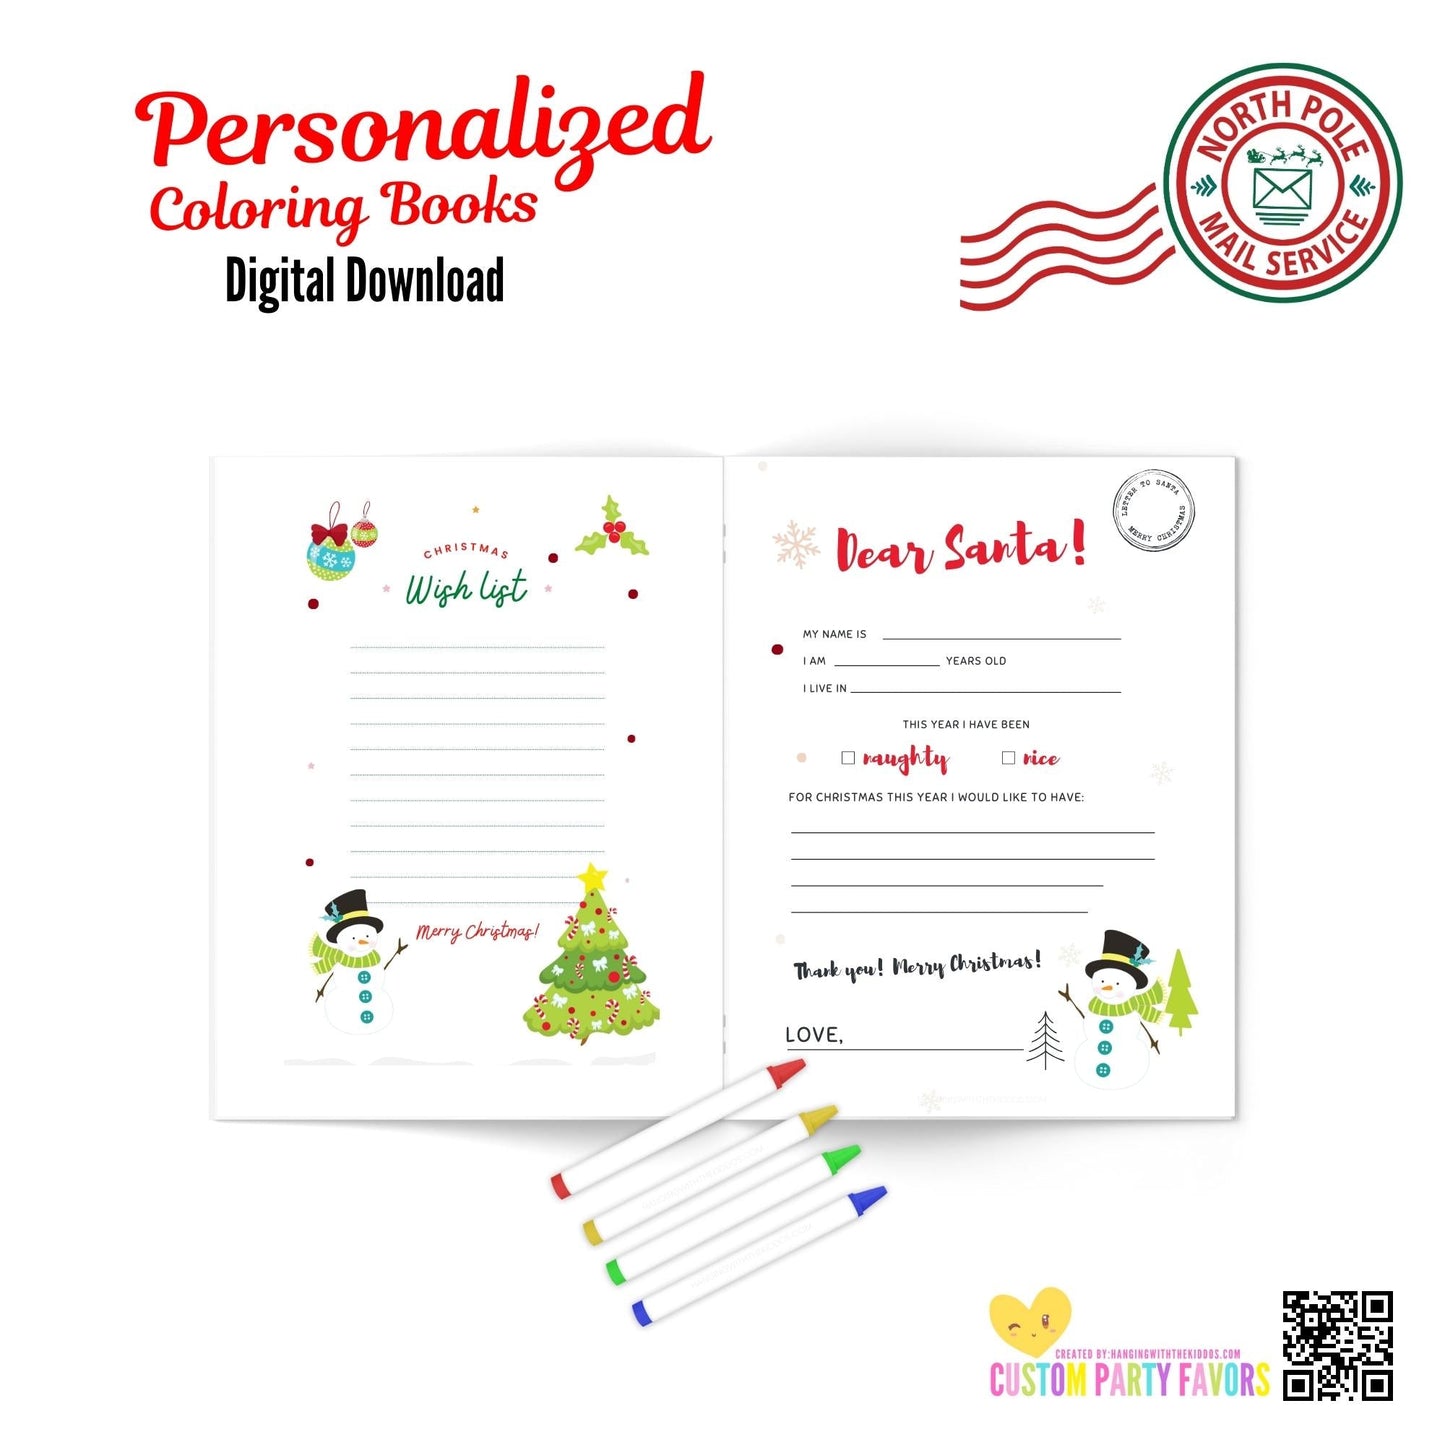 Digital Download|Personalized Christmas Coloring & Activity Books|03